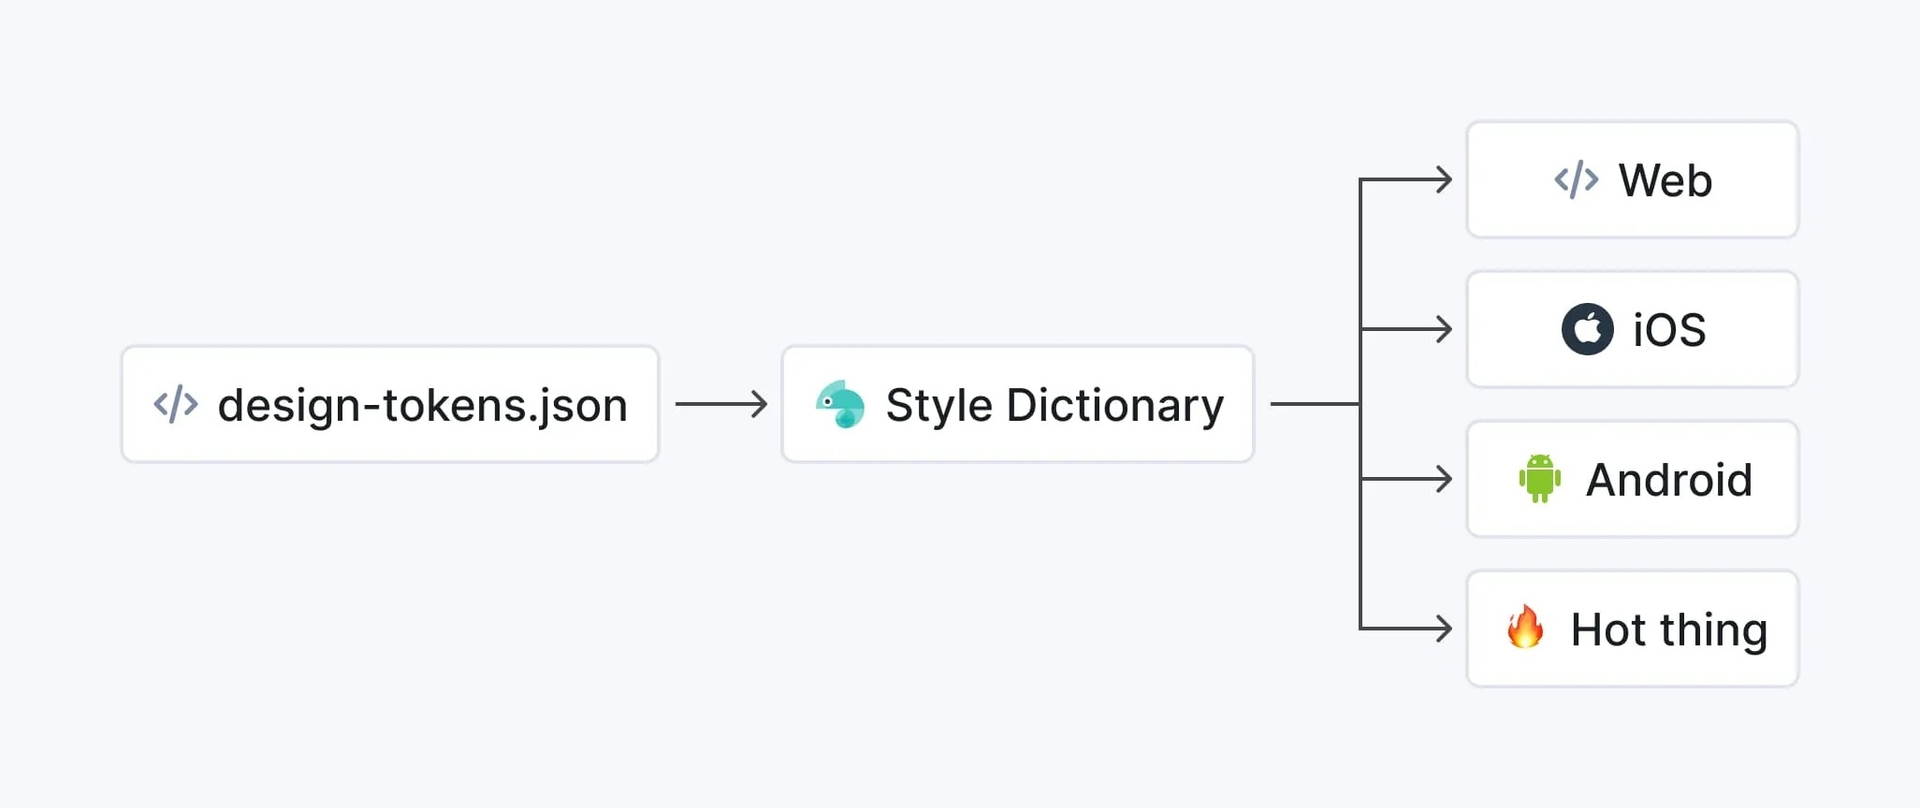 A flow chart showing design-tokens.json being input into Style Dictionary and creating several outputs including Web, iOS, Android, and the next hot thing